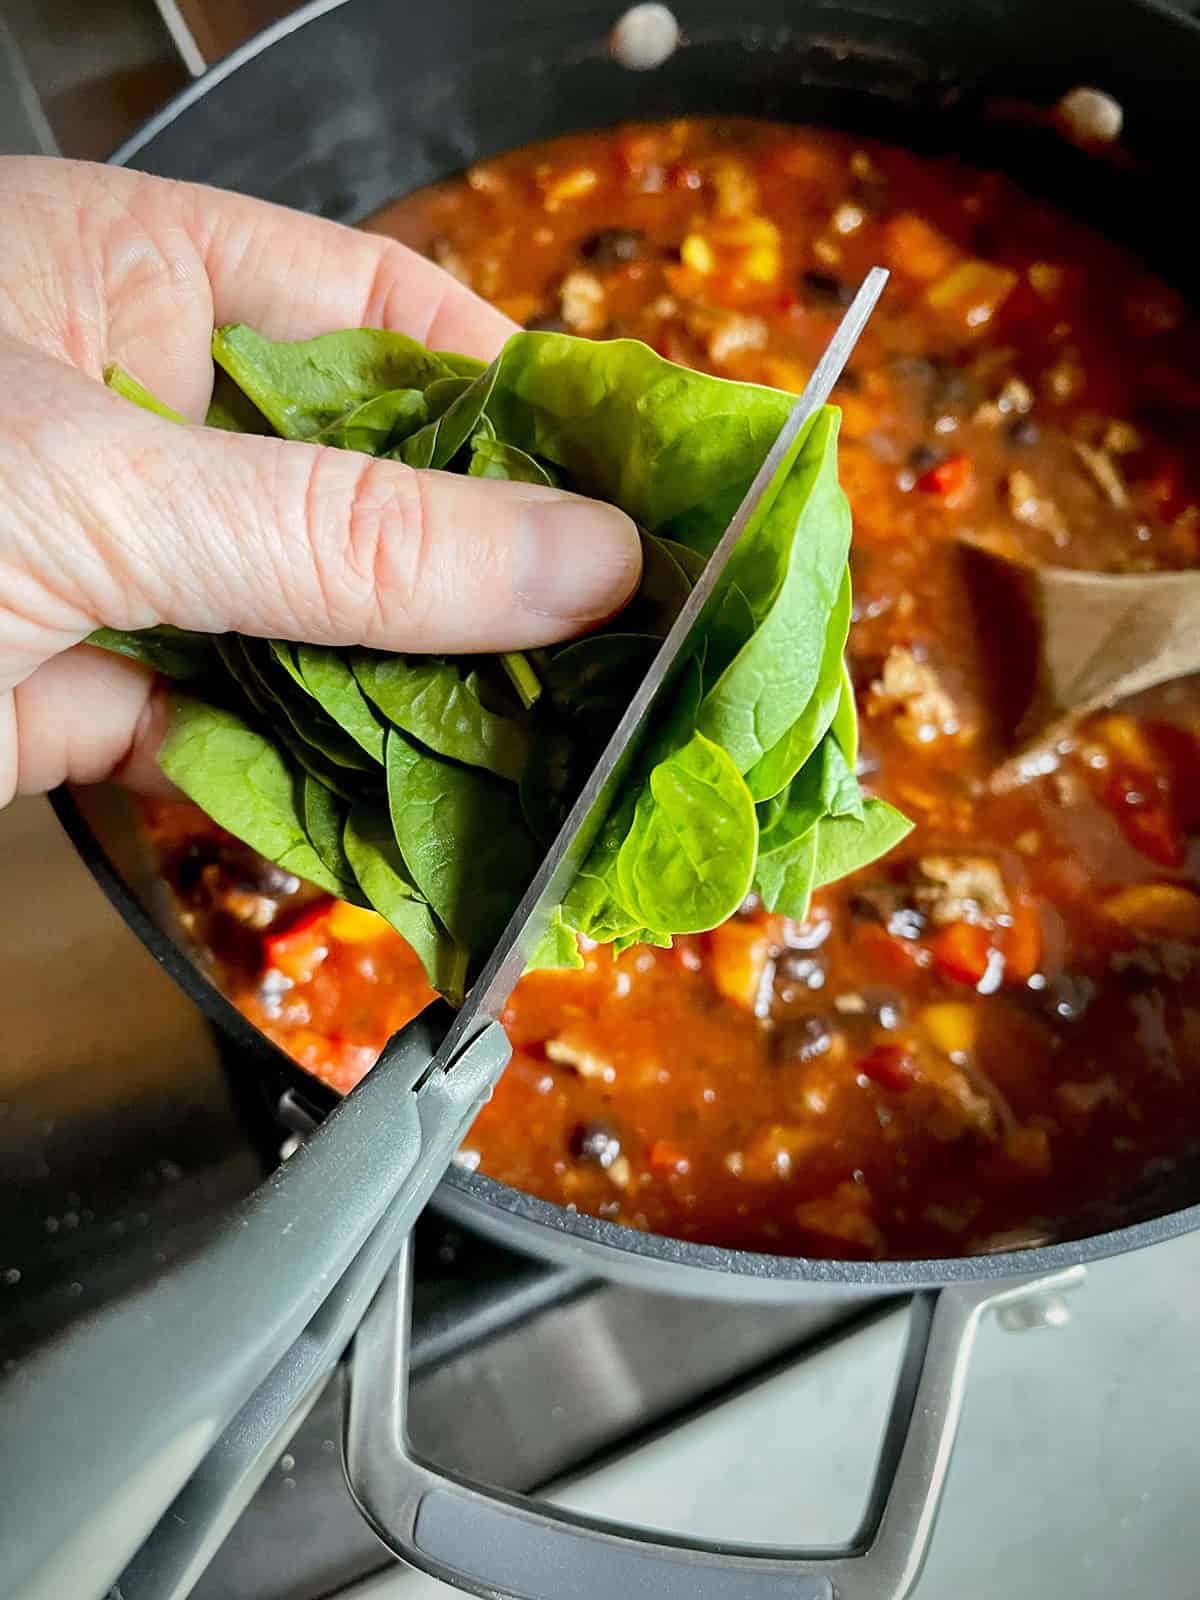 A stovetop pot of turkey taco soup with fresh spinach being added. The baby spinach is being diced with scissors.